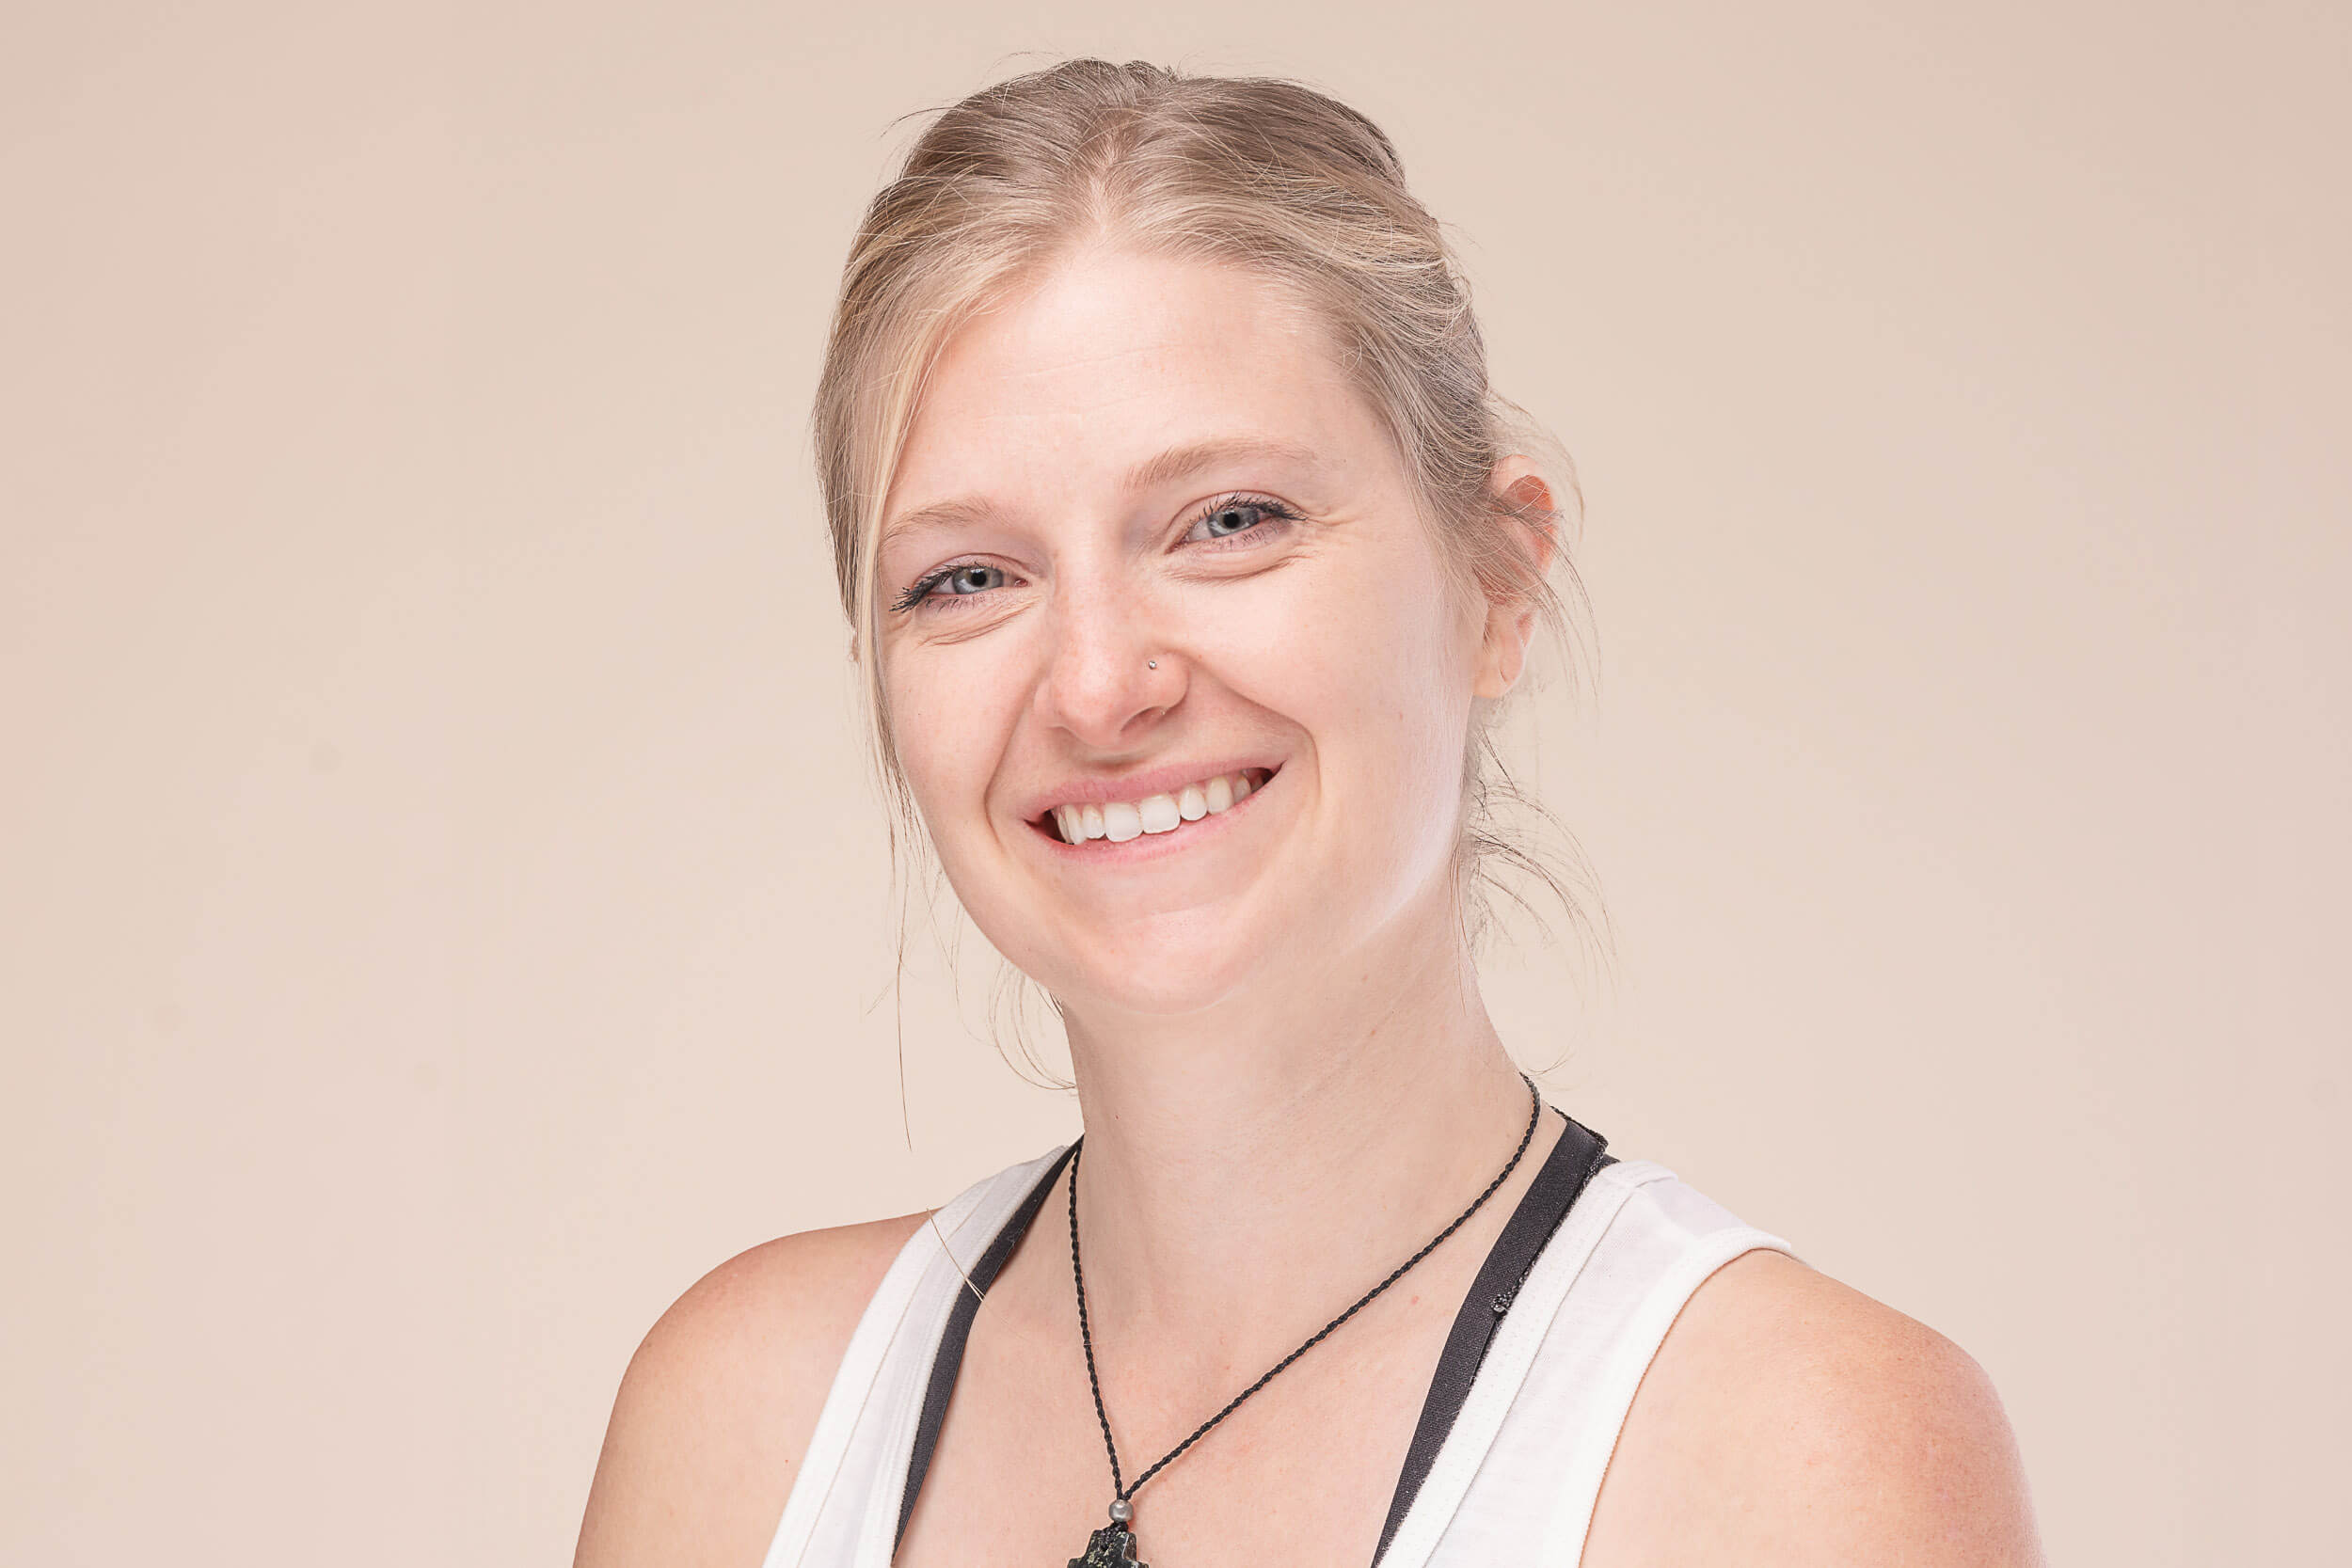 Smiling young yoga instructor in a white tank top with a relaxed and friendly demeanor, conveying the welcoming and inclusive spirit of Shala Yoga studio in Squamish.